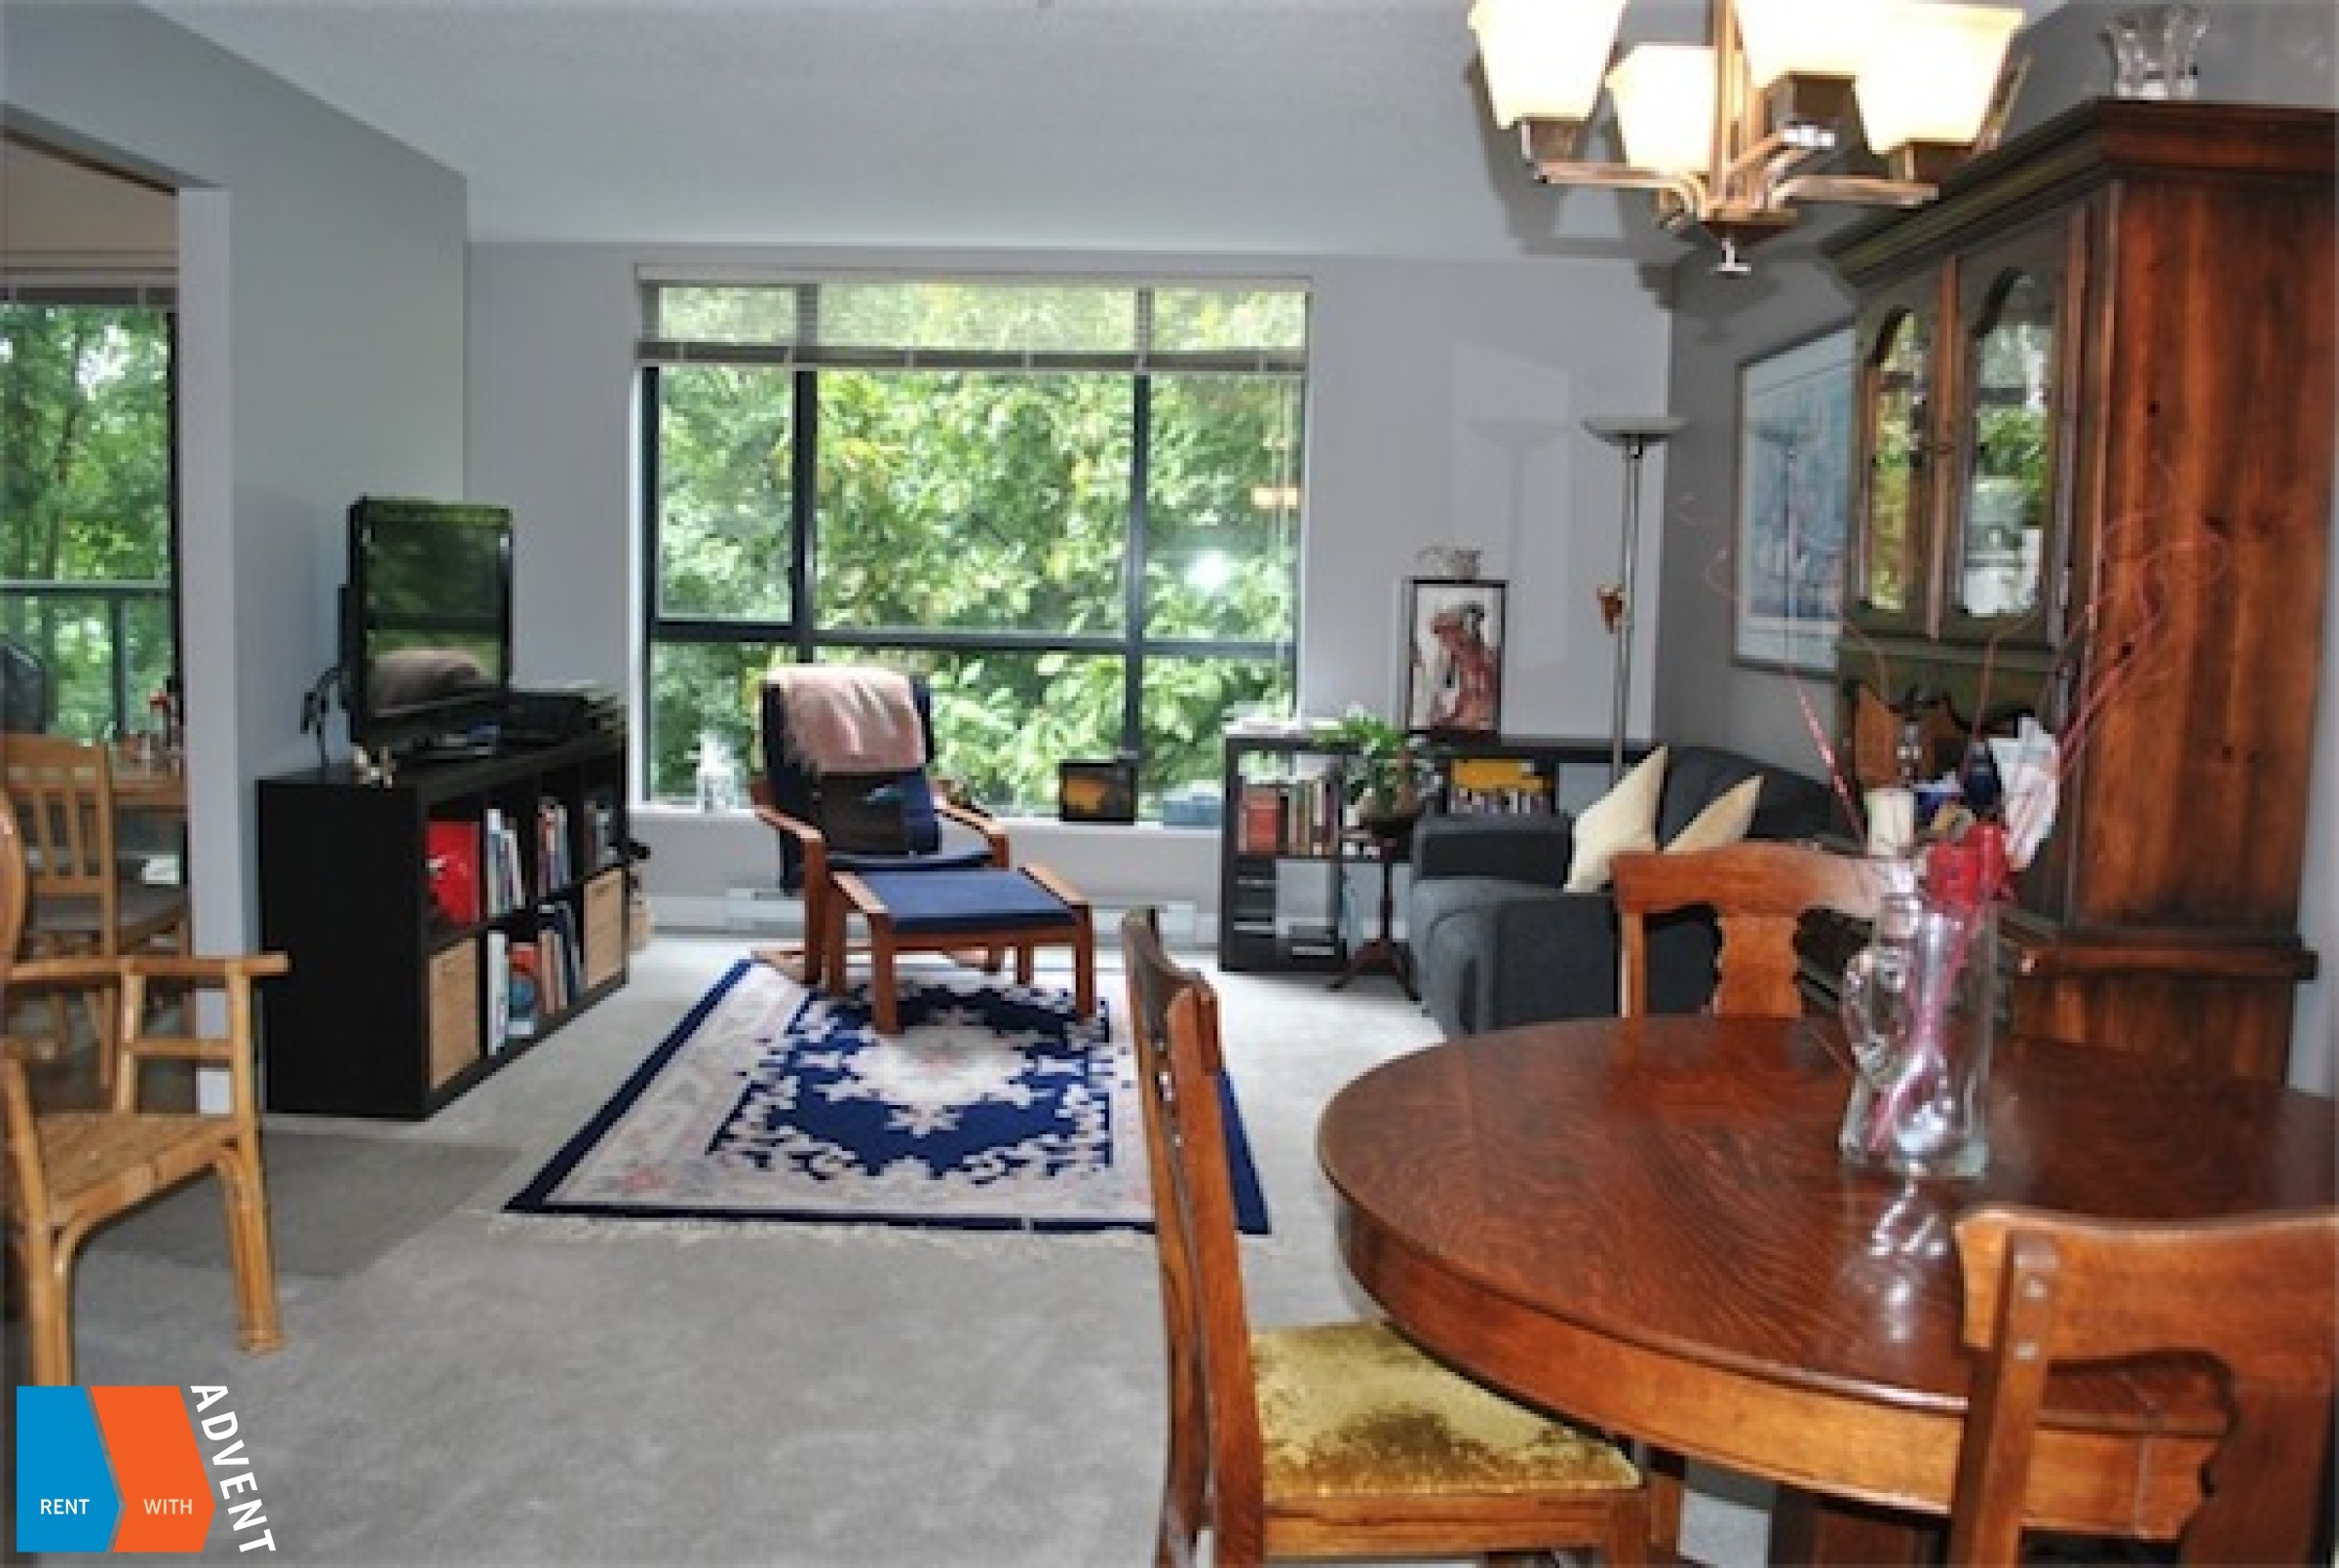 Amberley Unfurnished 3 Bedroom Apartment For Rent in East Vancouver. 205 - 3583 Crowley Drive, Vancouver, BC, Canada.